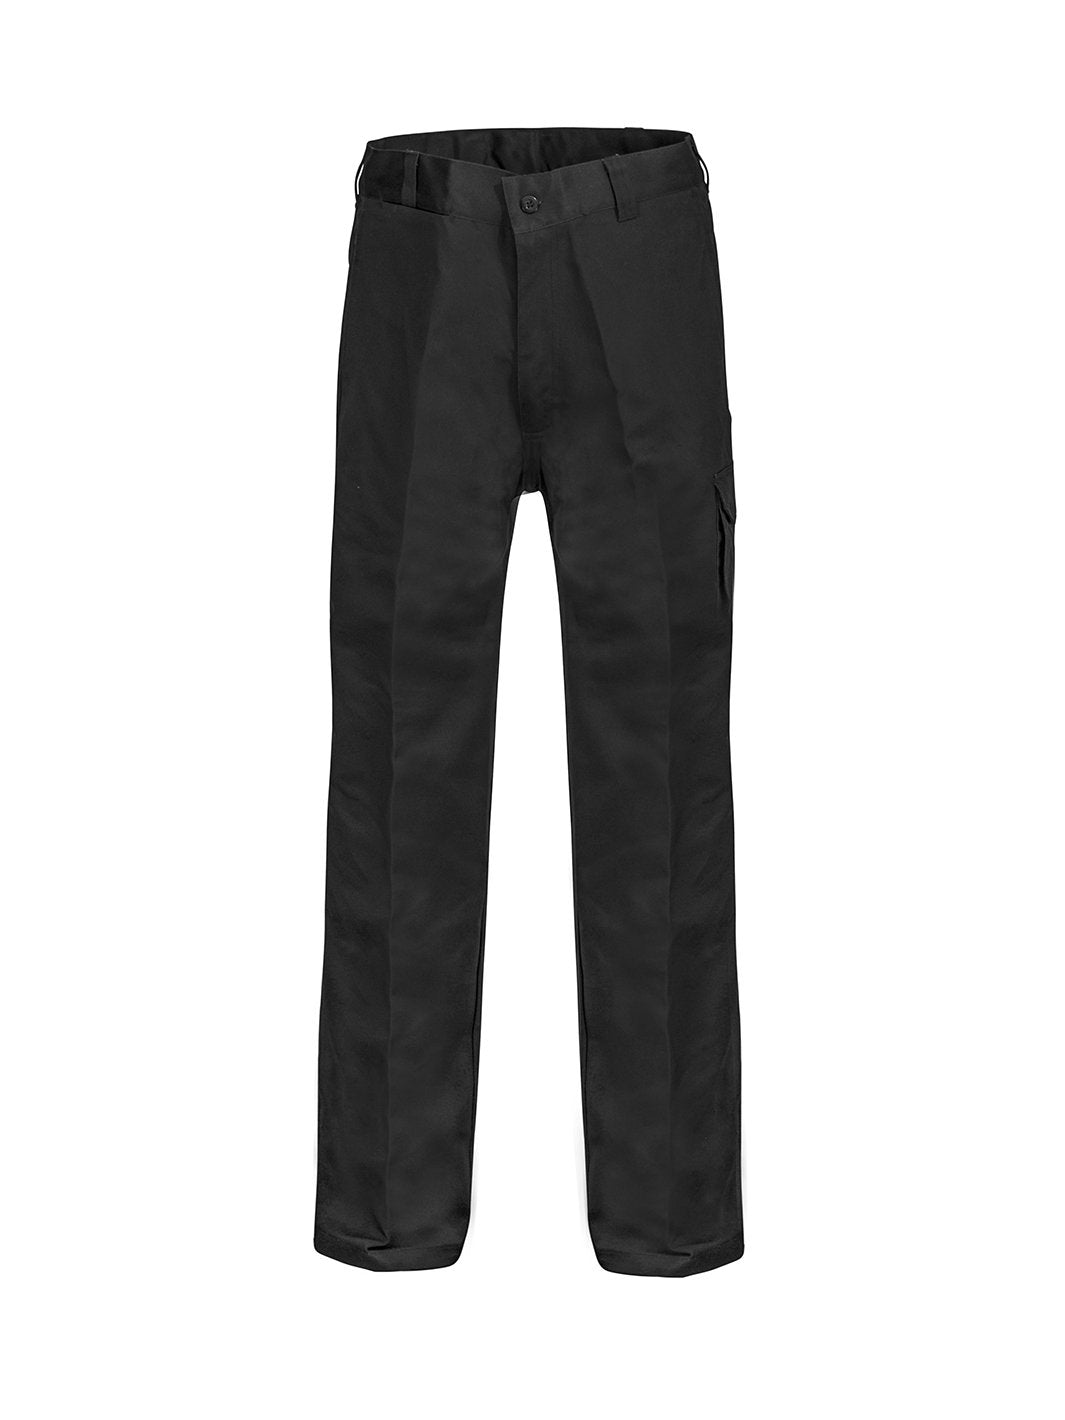 WorkCraft Modern Fit Poly/Cotton Cargo Trousers (Regular) WP3050